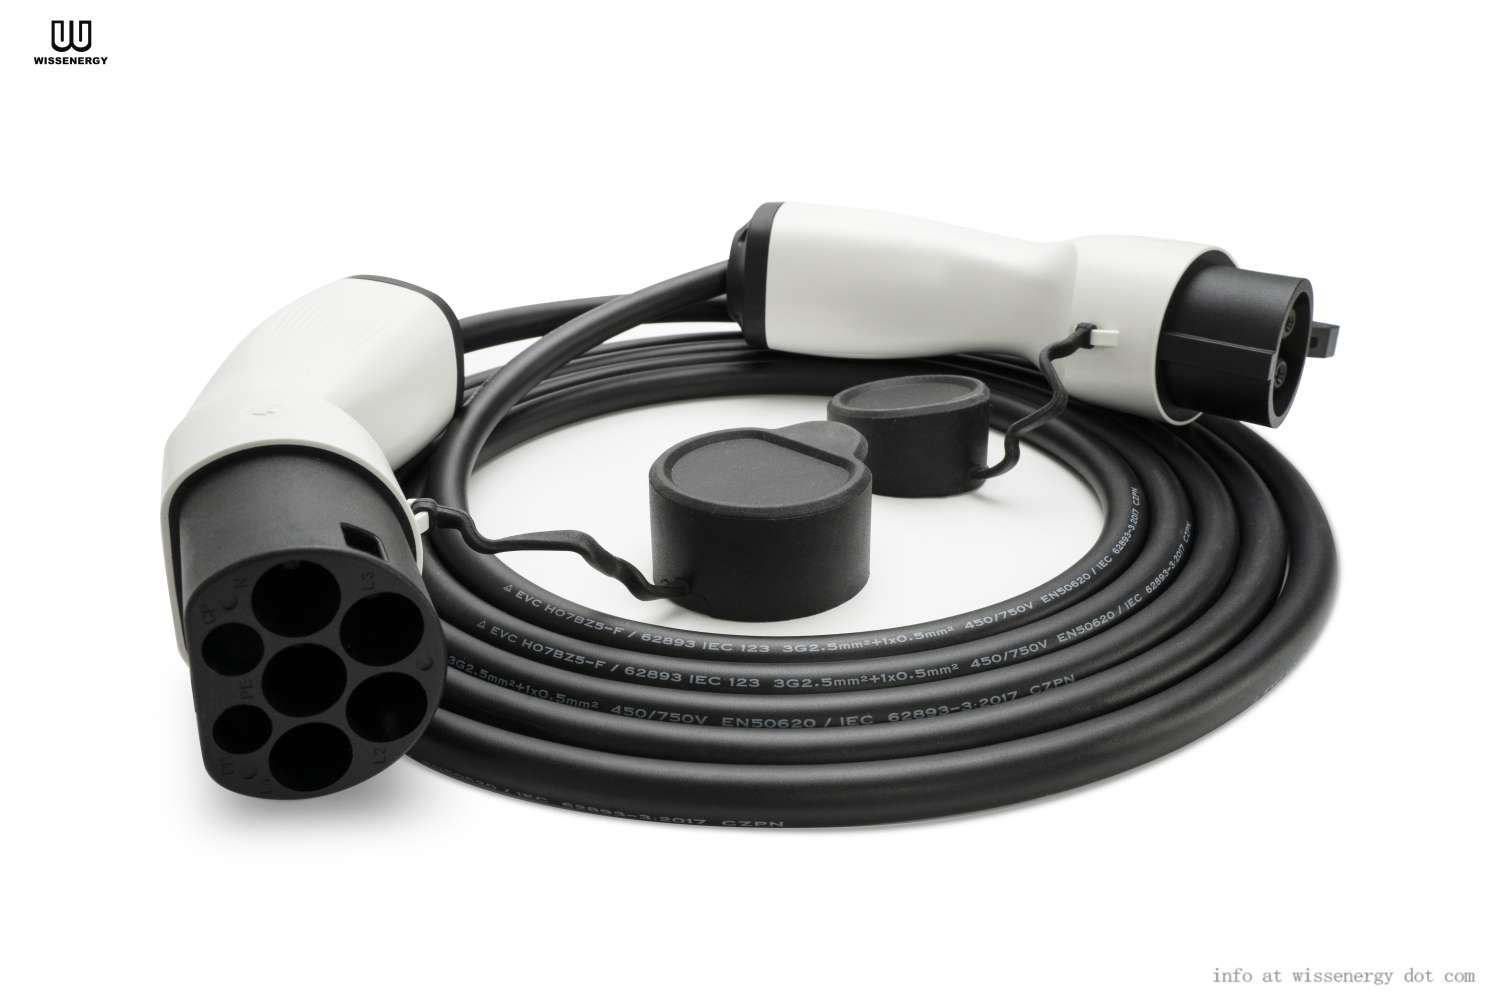 This product is particularly used for electric vehicle charging, generally called a mode 3 EV charging cable designed to connect an EV charger and an electric car.